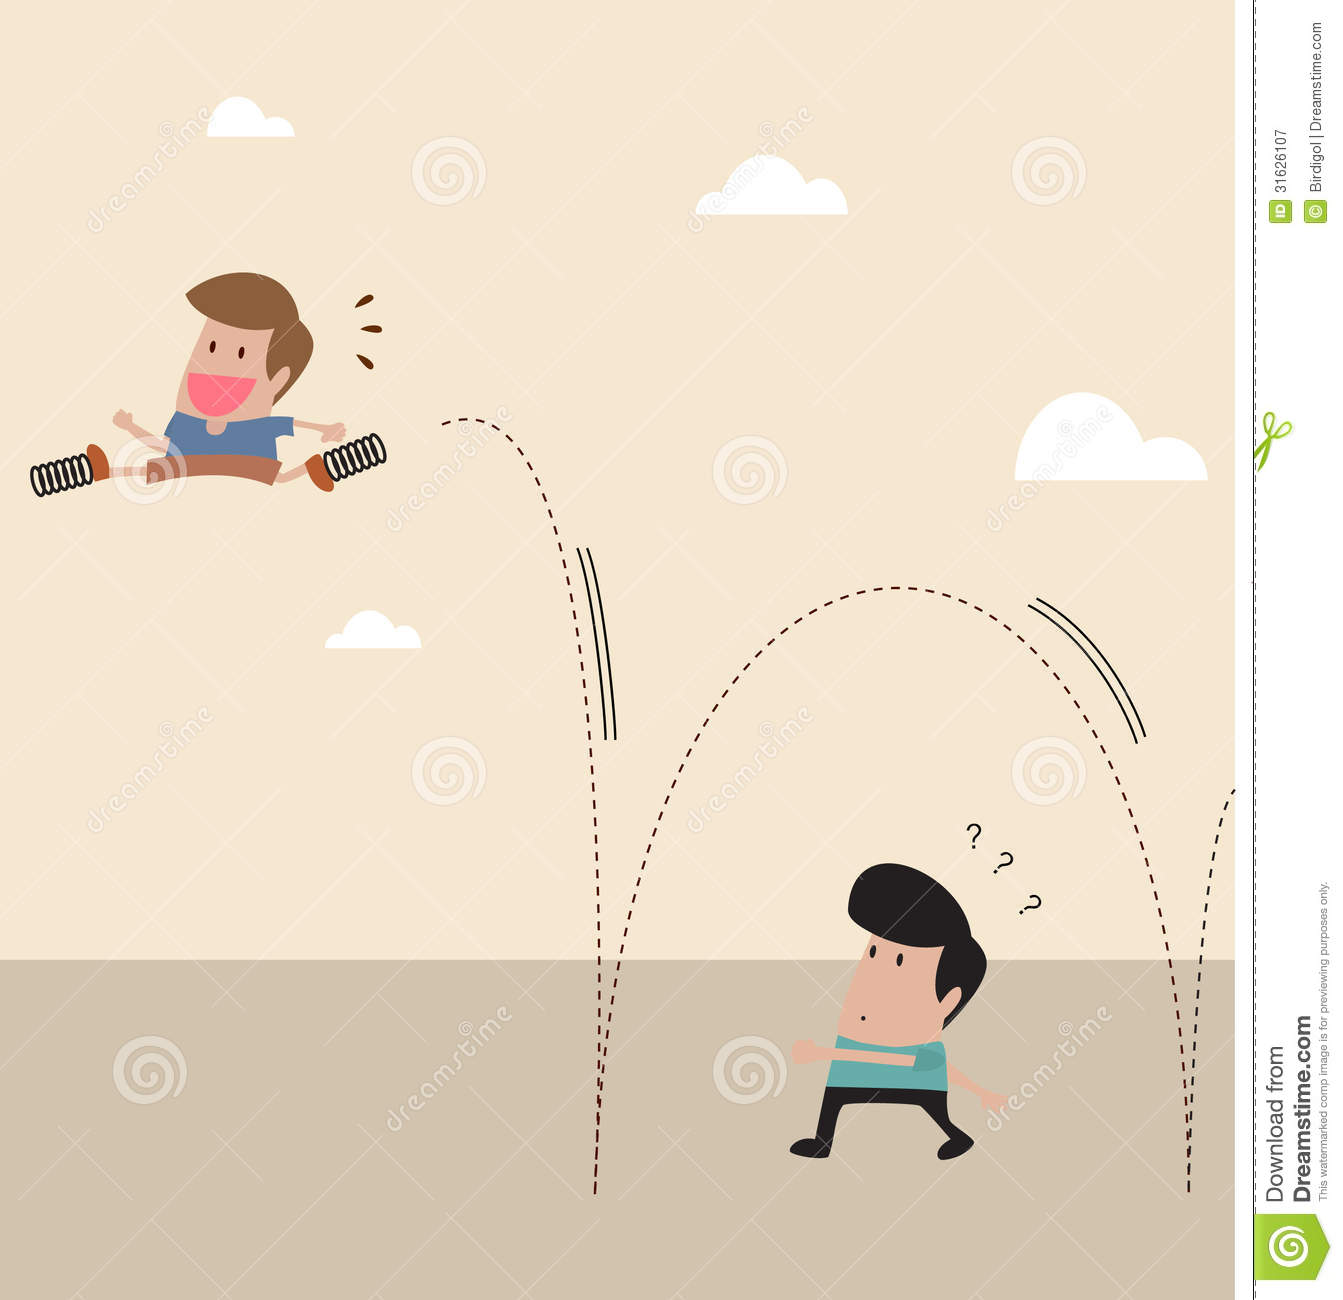 Kid With Spring At Shoe Jump Across Another Man Royalty Free Stock    